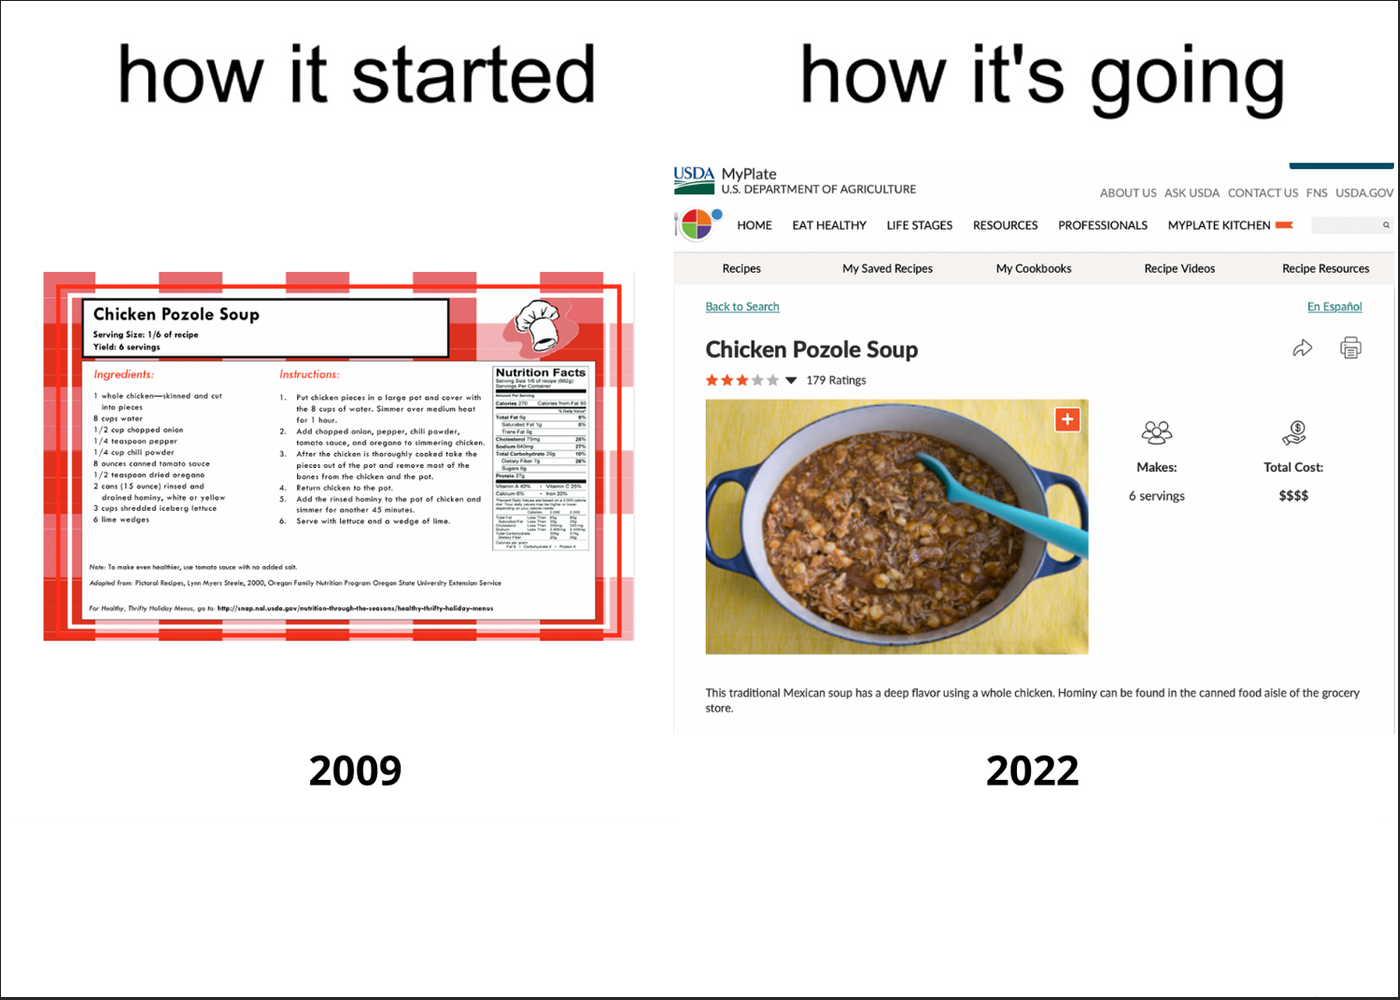 how it started with a word document of a recipe Chicken Pozole Soup 2009; how it's going with an image of Chicken Pozole Soup on the USDA website MyPlate Kitchen 2022